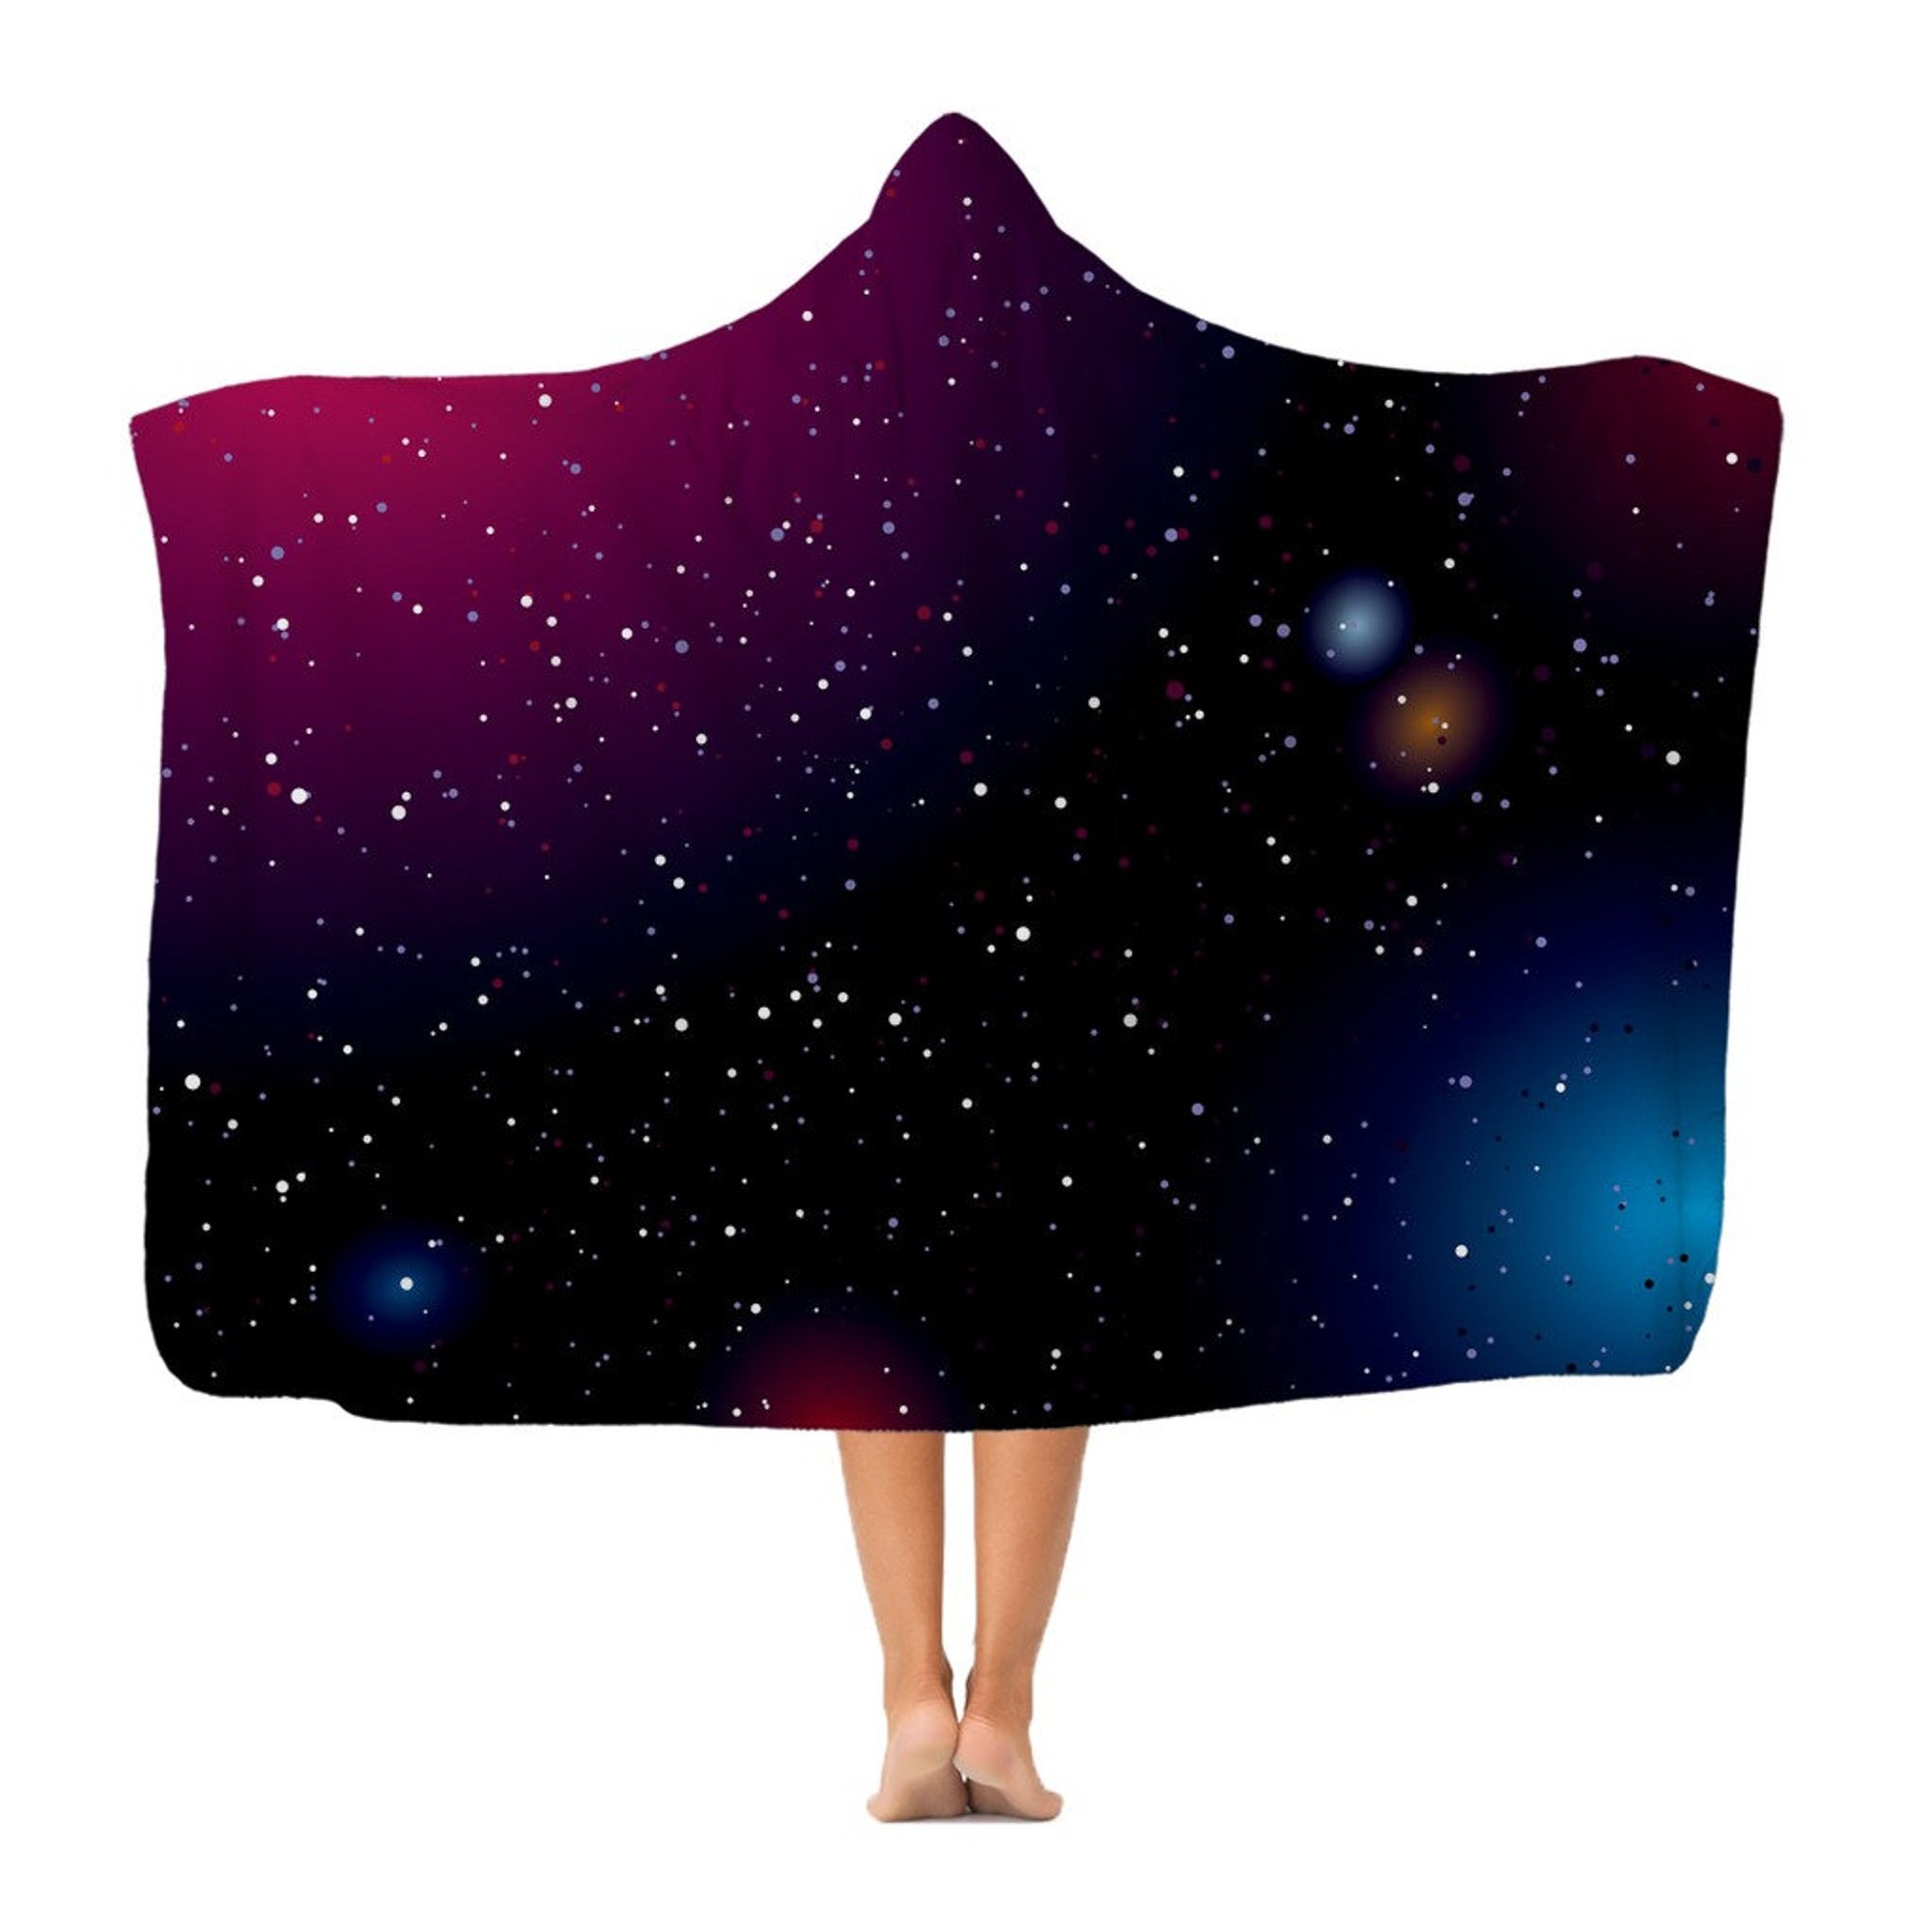 Discover Space Landscape Adult Hooded Blanket, Space Arena Hooded Blanket, Christmas Gift Idea, Birthday Gift, Made to Order in UK, Made in USA